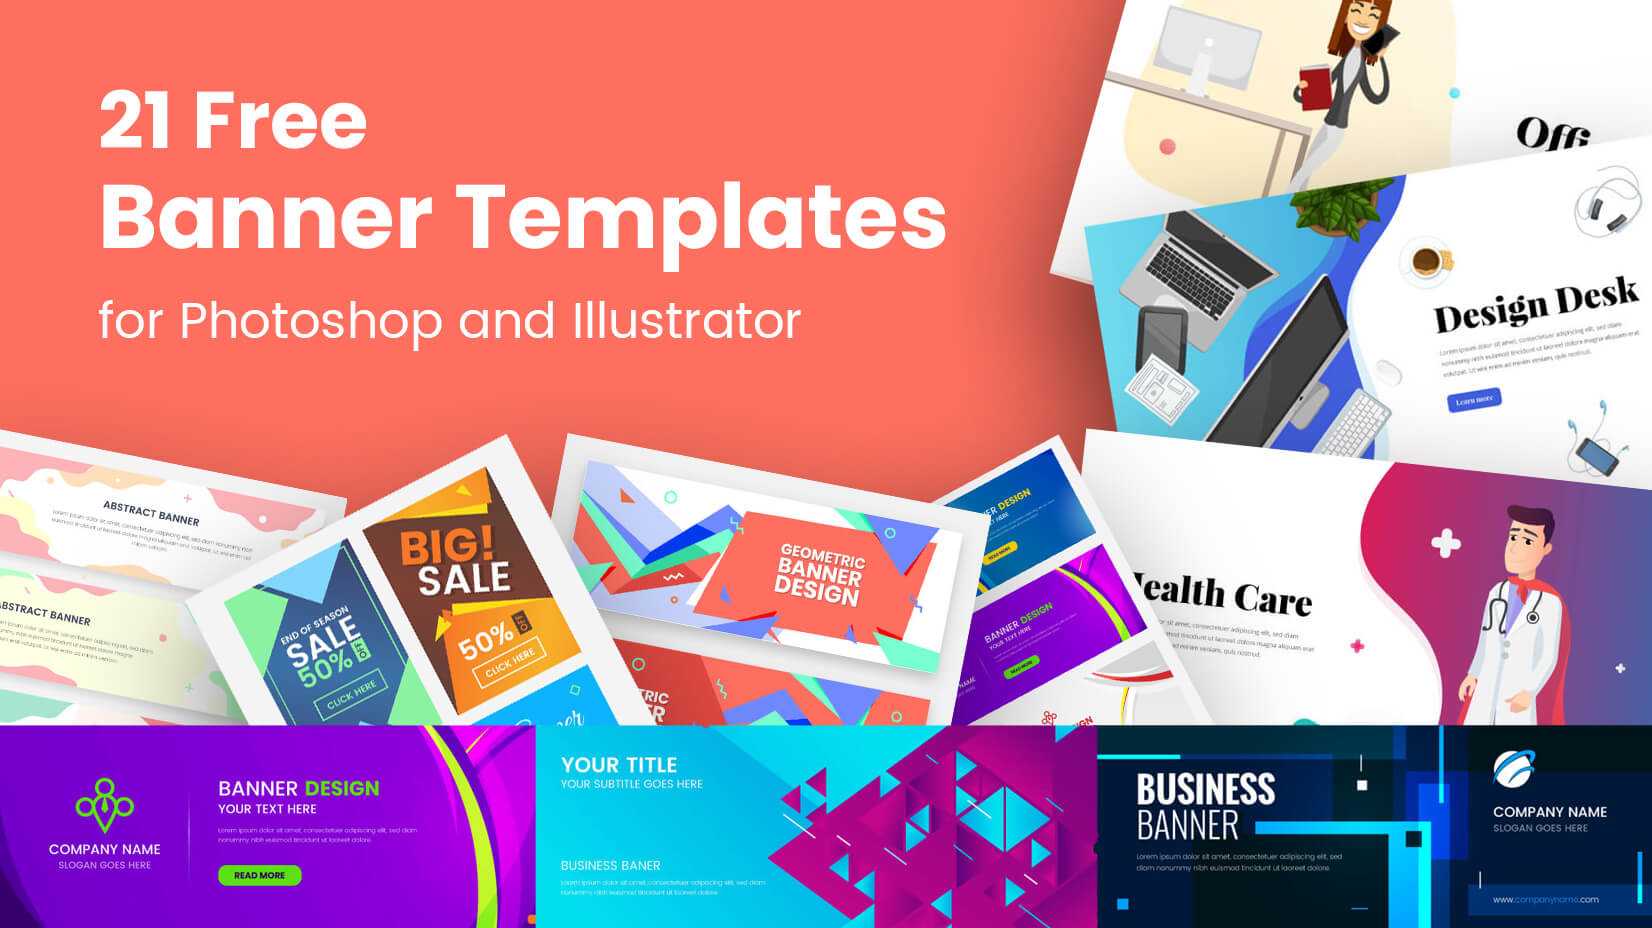 21 Free Banner Templates For Photoshop And Illustrator With Regard To Banner Template For Photoshop